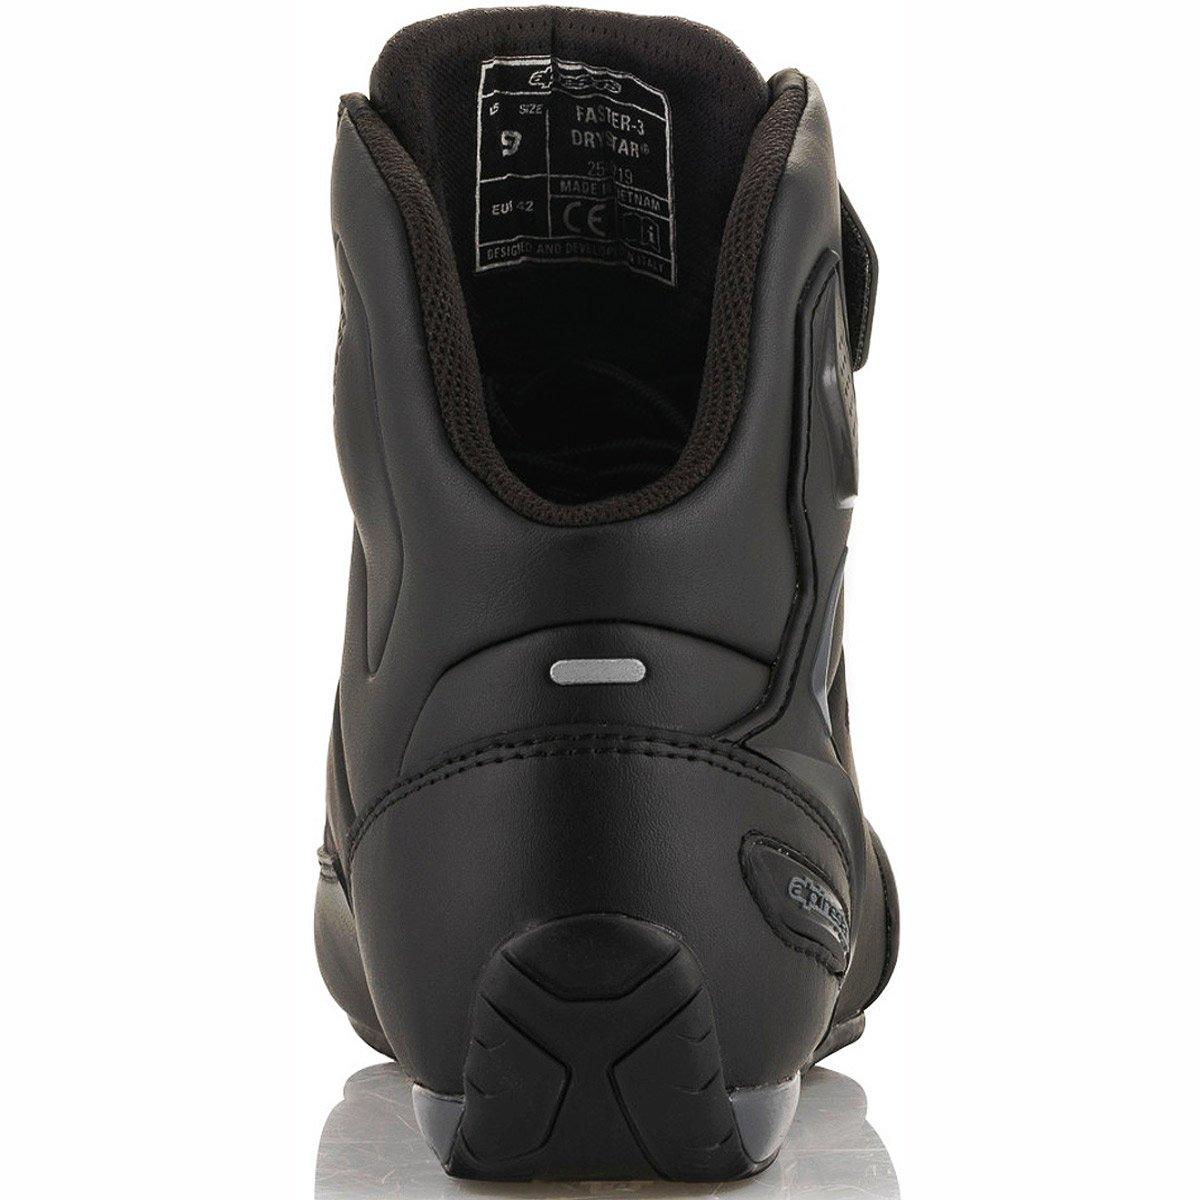 Alpinestars Faster-3 Drystar Shoes WP Black Cool Gray - Motorcycle Trainers & Casual Shoes